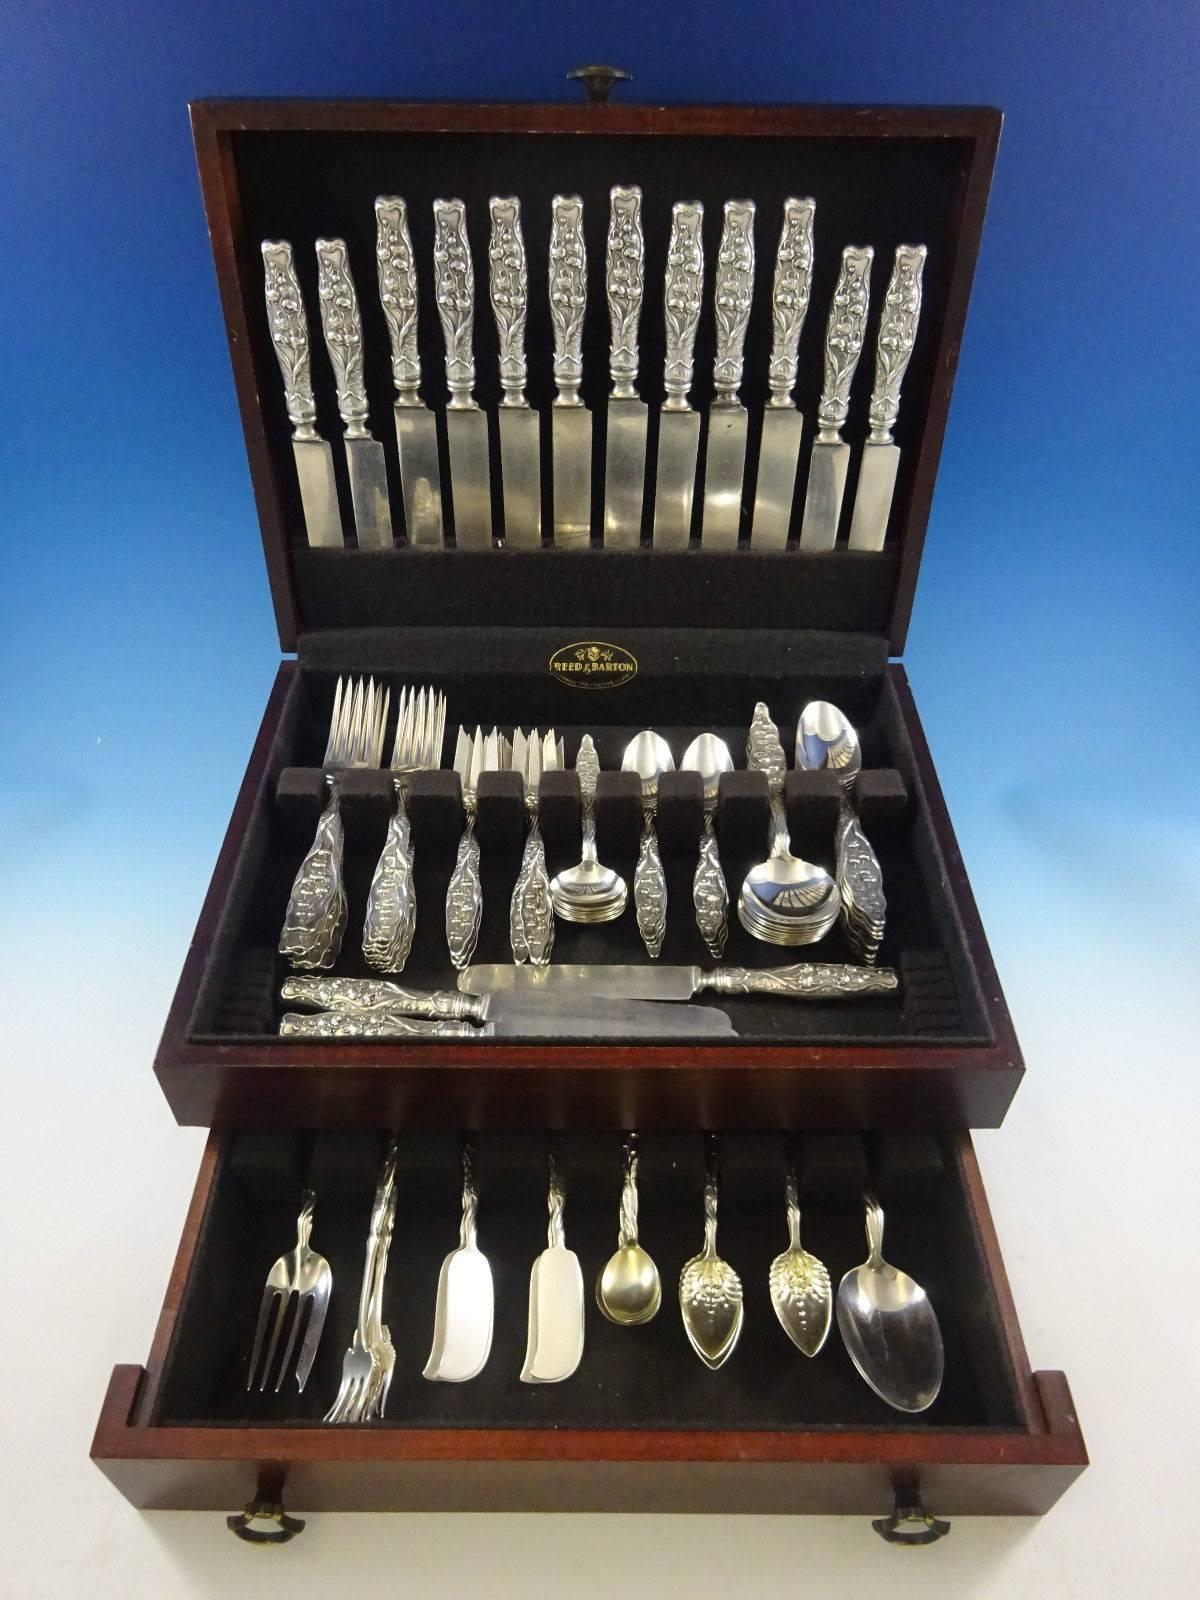 Lily of the Valley by Whiting circa 1885 sterling silver flatware set of 107 pieces. This set includes: 

Eight dinner size knives, blunt silver plated blades, 9 3/8